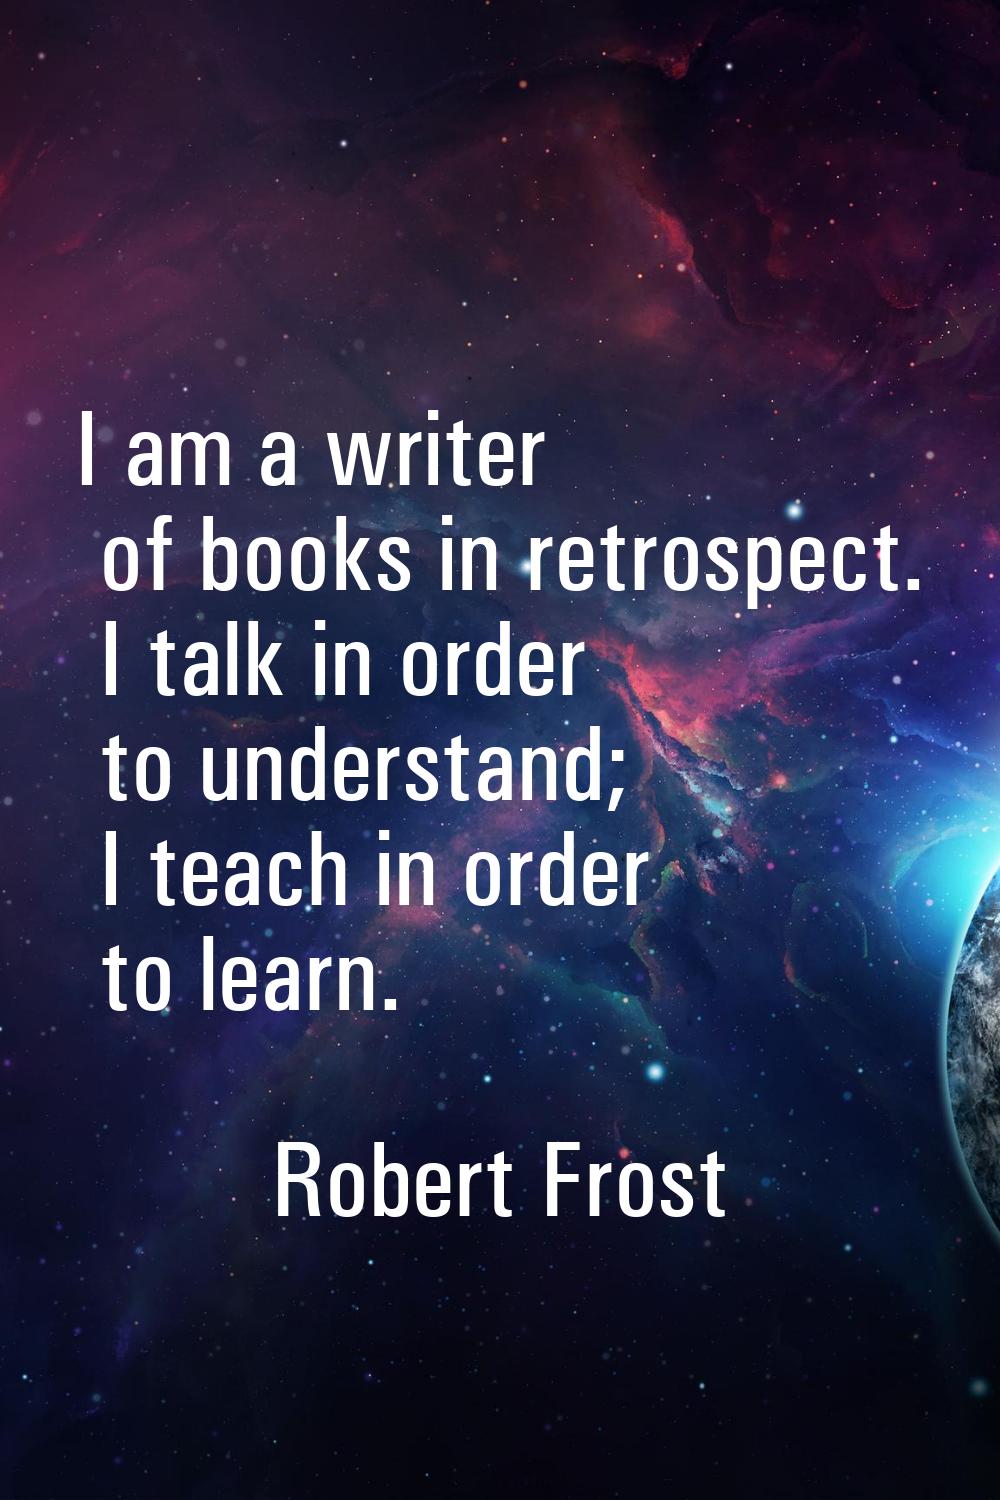 I am a writer of books in retrospect. I talk in order to understand; I teach in order to learn.